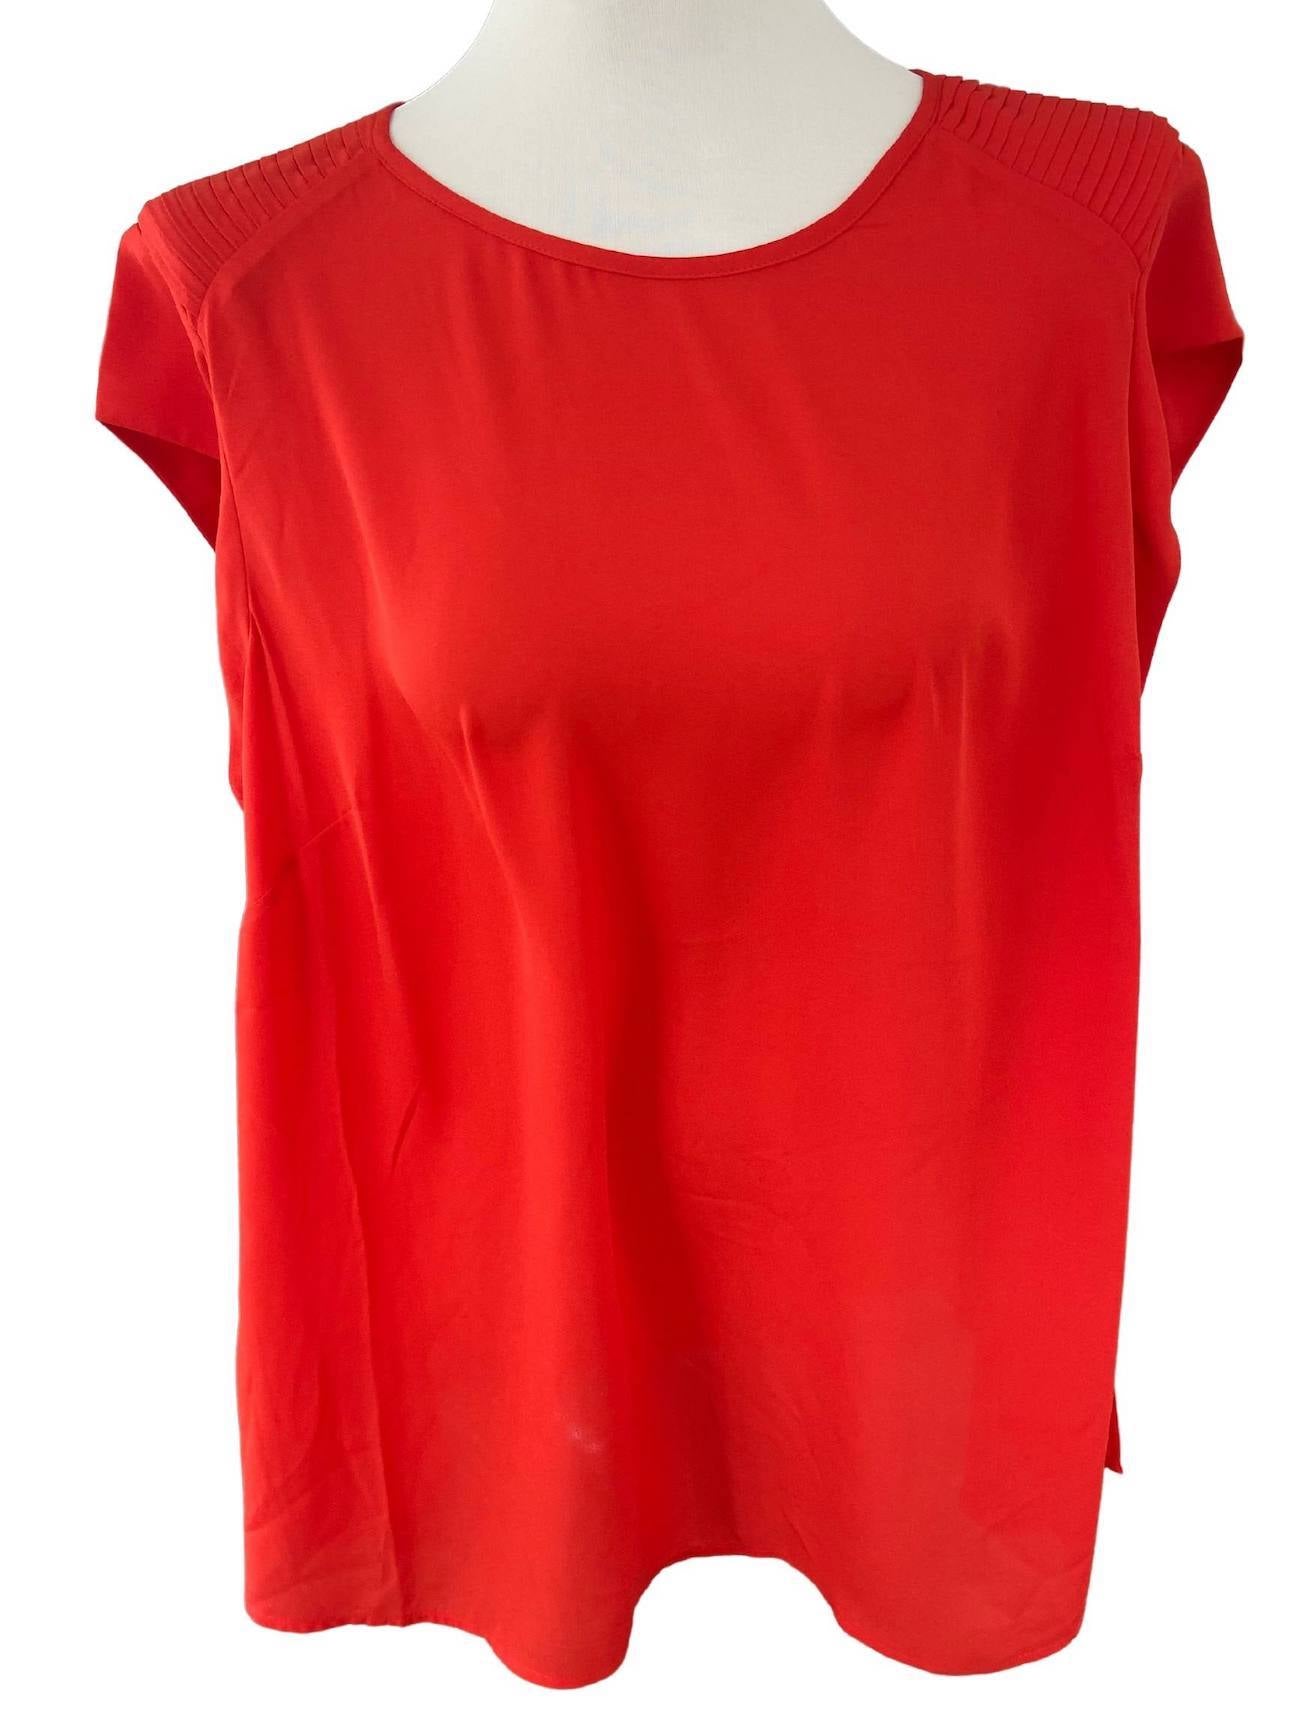 Bright Spring DR2 hot tomato red pleated blouse